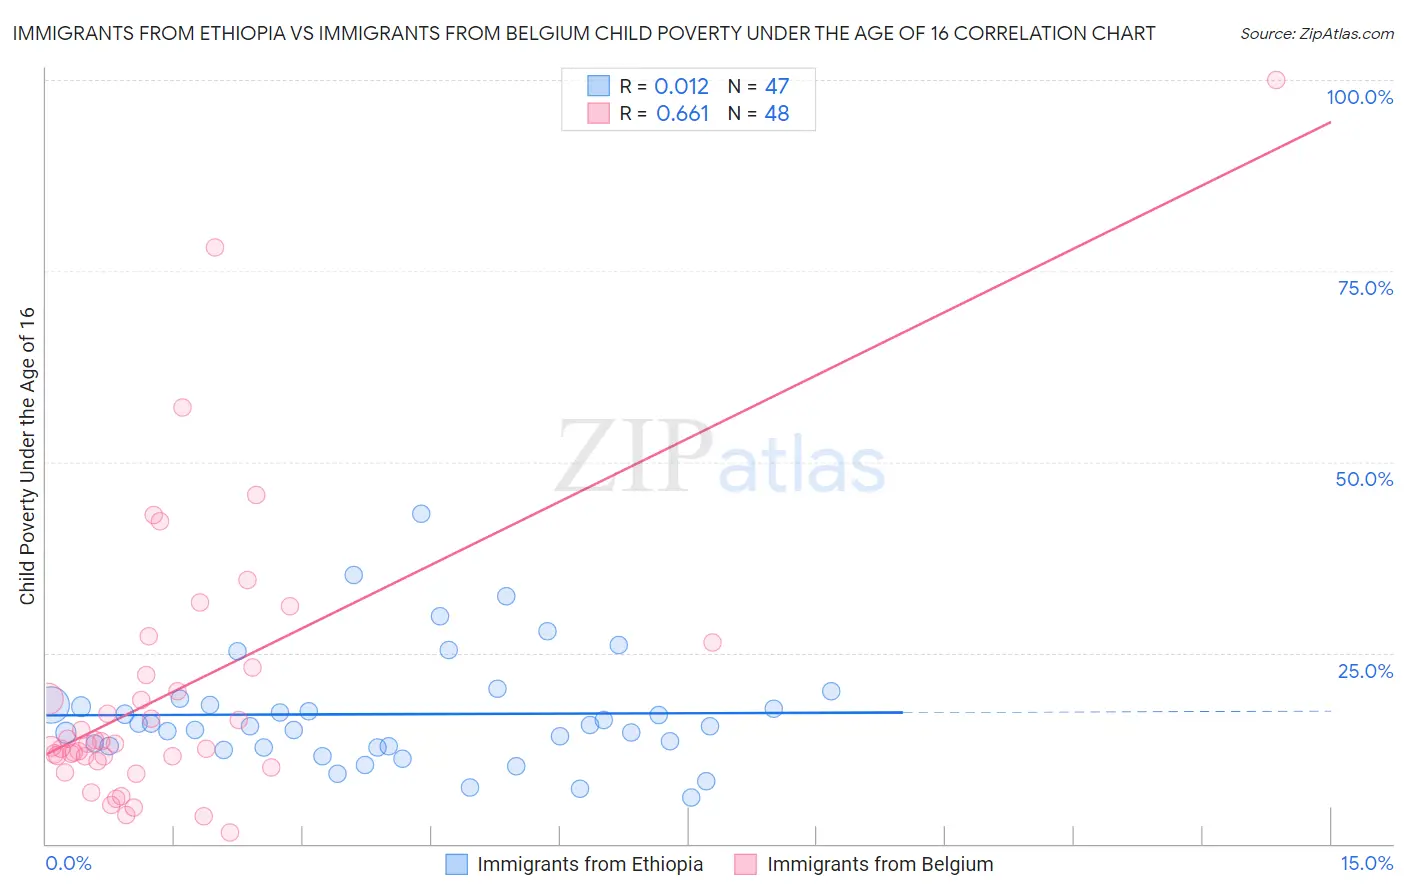 Immigrants from Ethiopia vs Immigrants from Belgium Child Poverty Under the Age of 16